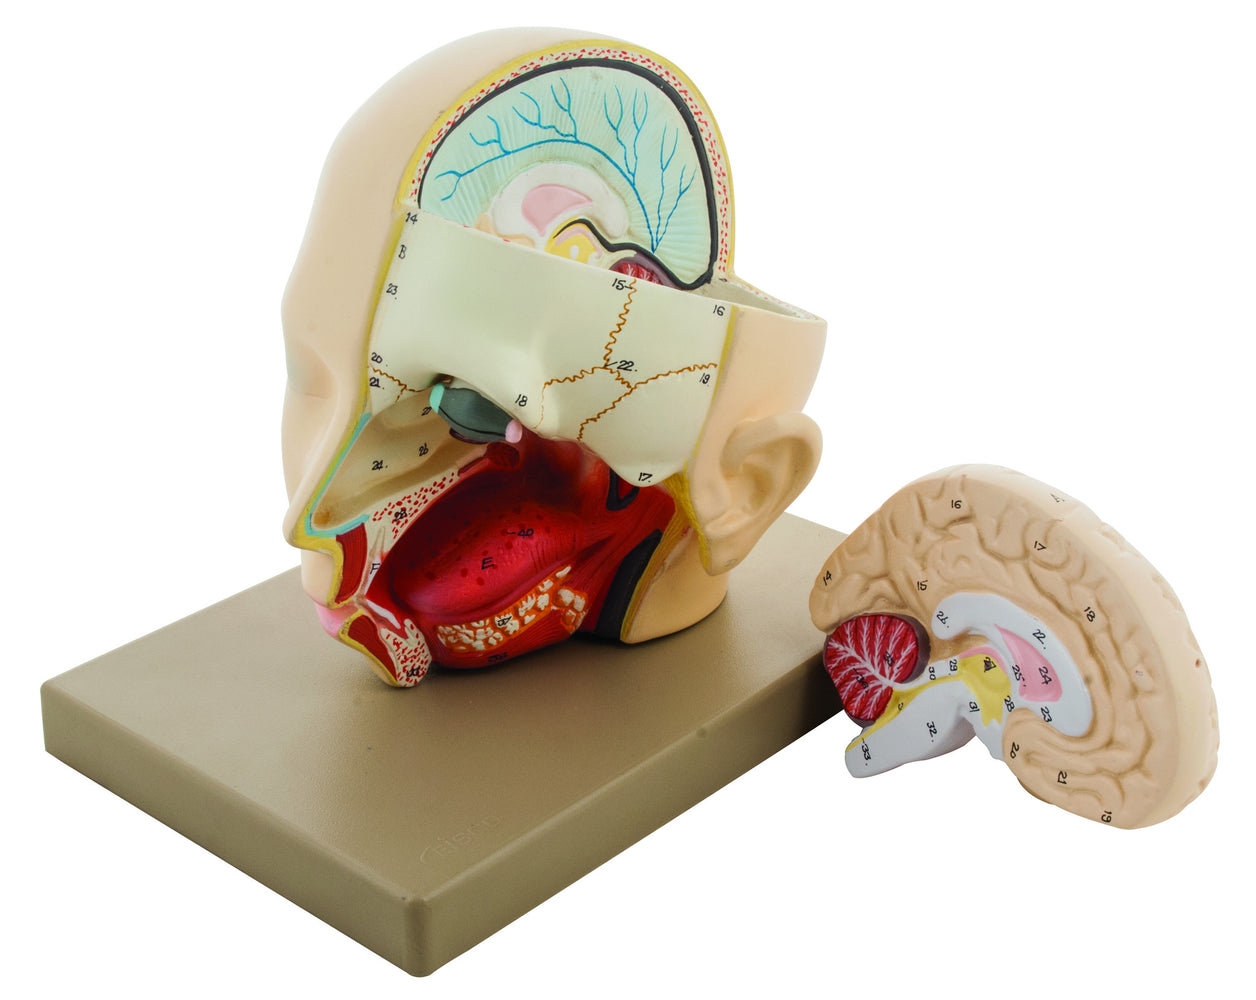 Model Human Head with Brain - 2 parts